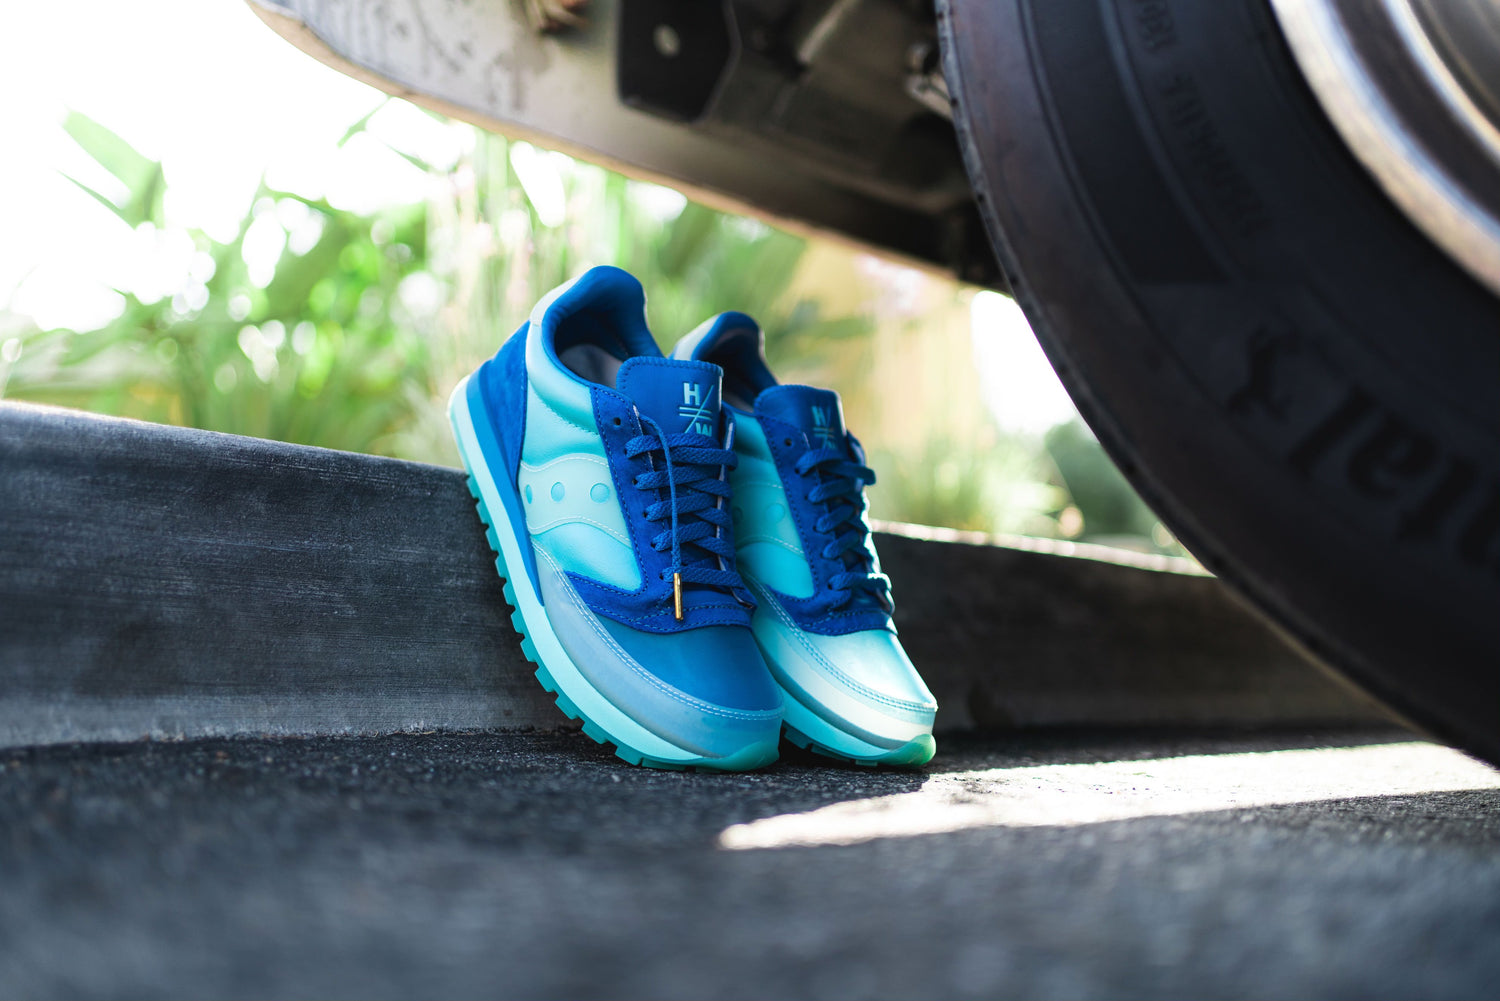 A pair of blue sneakers standing next to a curb under a car